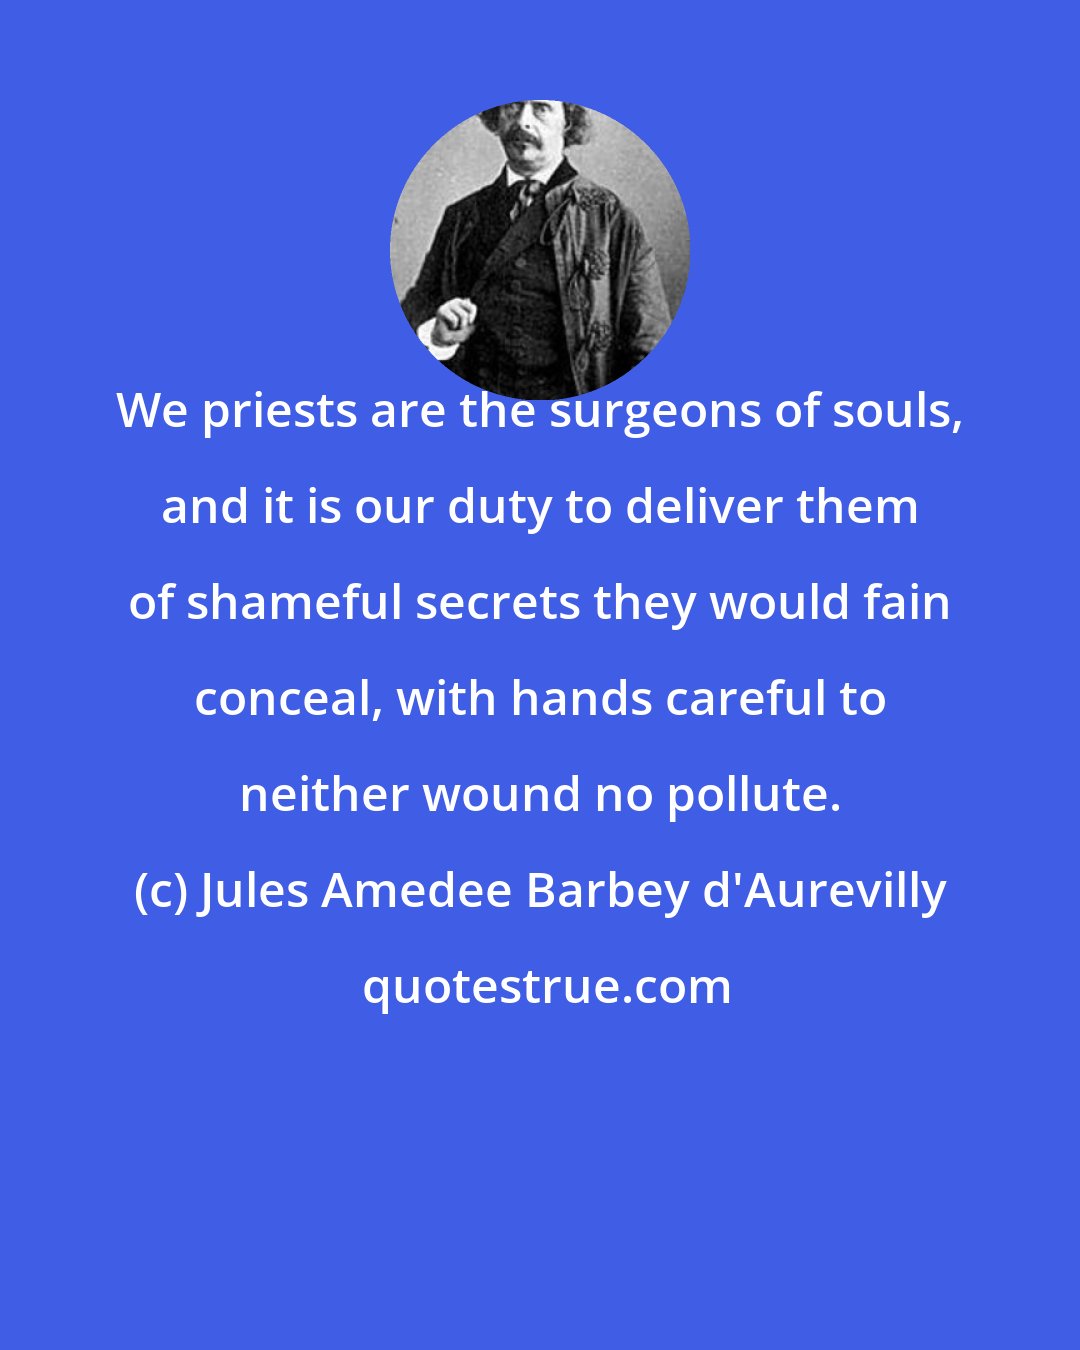 Jules Amedee Barbey d'Aurevilly: We priests are the surgeons of souls, and it is our duty to deliver them of shameful secrets they would fain conceal, with hands careful to neither wound no pollute.